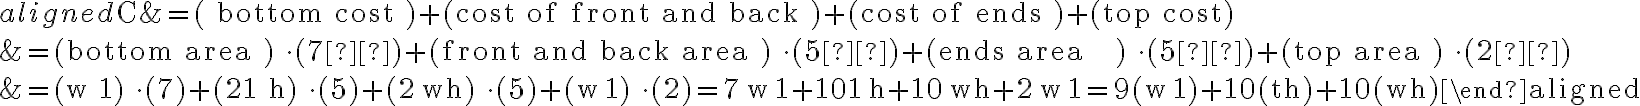 \begin{aligned}\mathrm{C} &=(\text { bottom cost })+(\text { cost of front and back })+(\text { cost of ends })+\text { (top cost) } \\&=(\text { bottom area }) \cdot(7¢)+(\text { front and back area }) \cdot(5¢)+(\text { ends area
    }) \cdot(5¢)+(\text { top area }) \cdot(2¢) \\&=(w 1) \cdot(7)+(21 h) \cdot(5)+(2 \mathrm{wh}) \cdot(5)+(\mathrm{w} 1) \cdot(2)=7 \mathrm{w} 1+101 \mathrm{~h}+10 \mathrm{wh}+2 \mathrm{w} 1=9(\mathrm{w} 1)+10(\mathrm{th})+10(\mathrm{wh})\end{aligned}